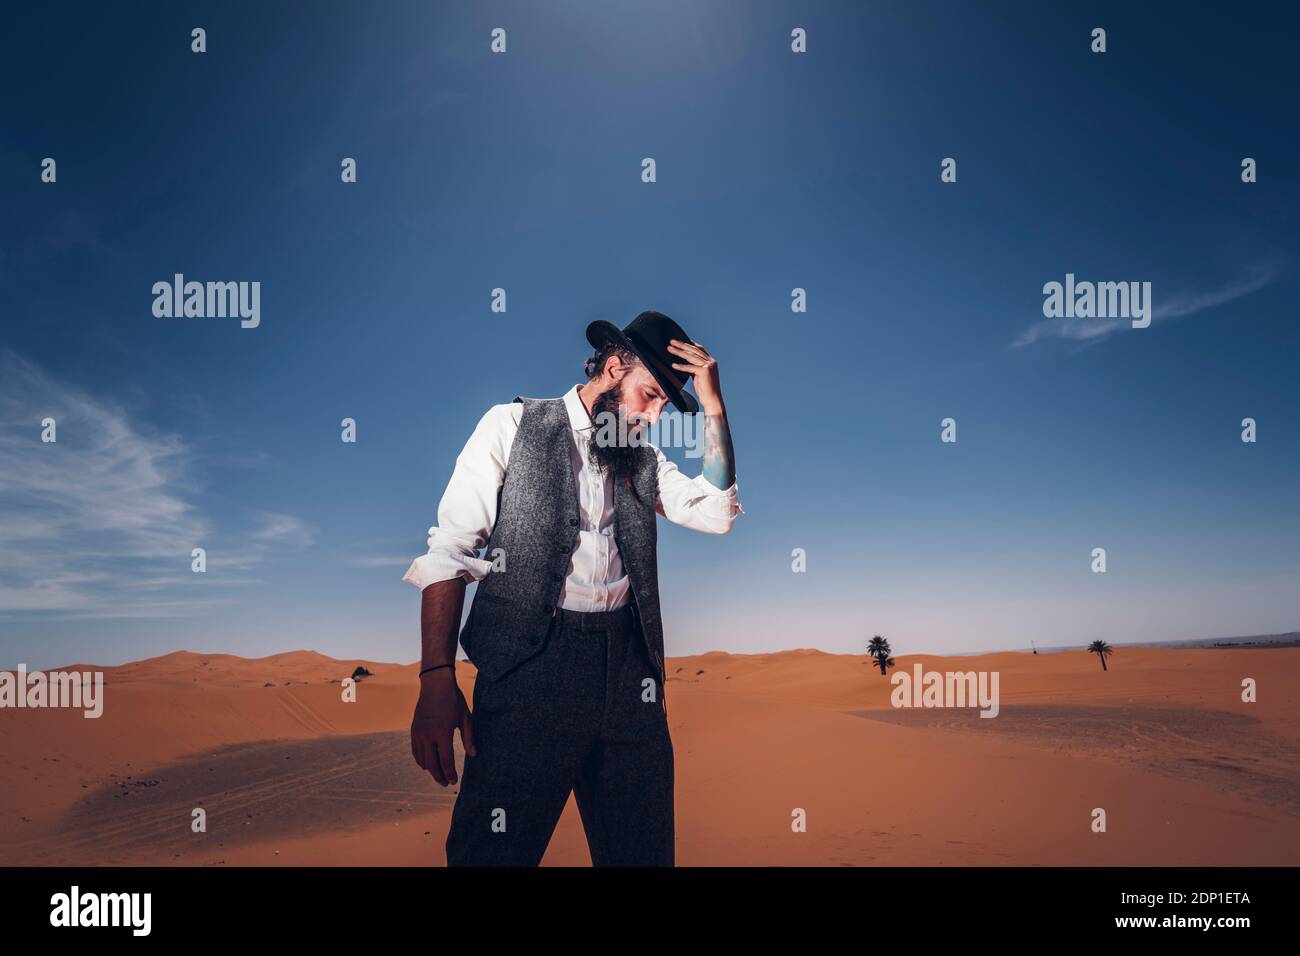 Man with a beard and hat in the dunes of the desert of Morocco Stock Photo